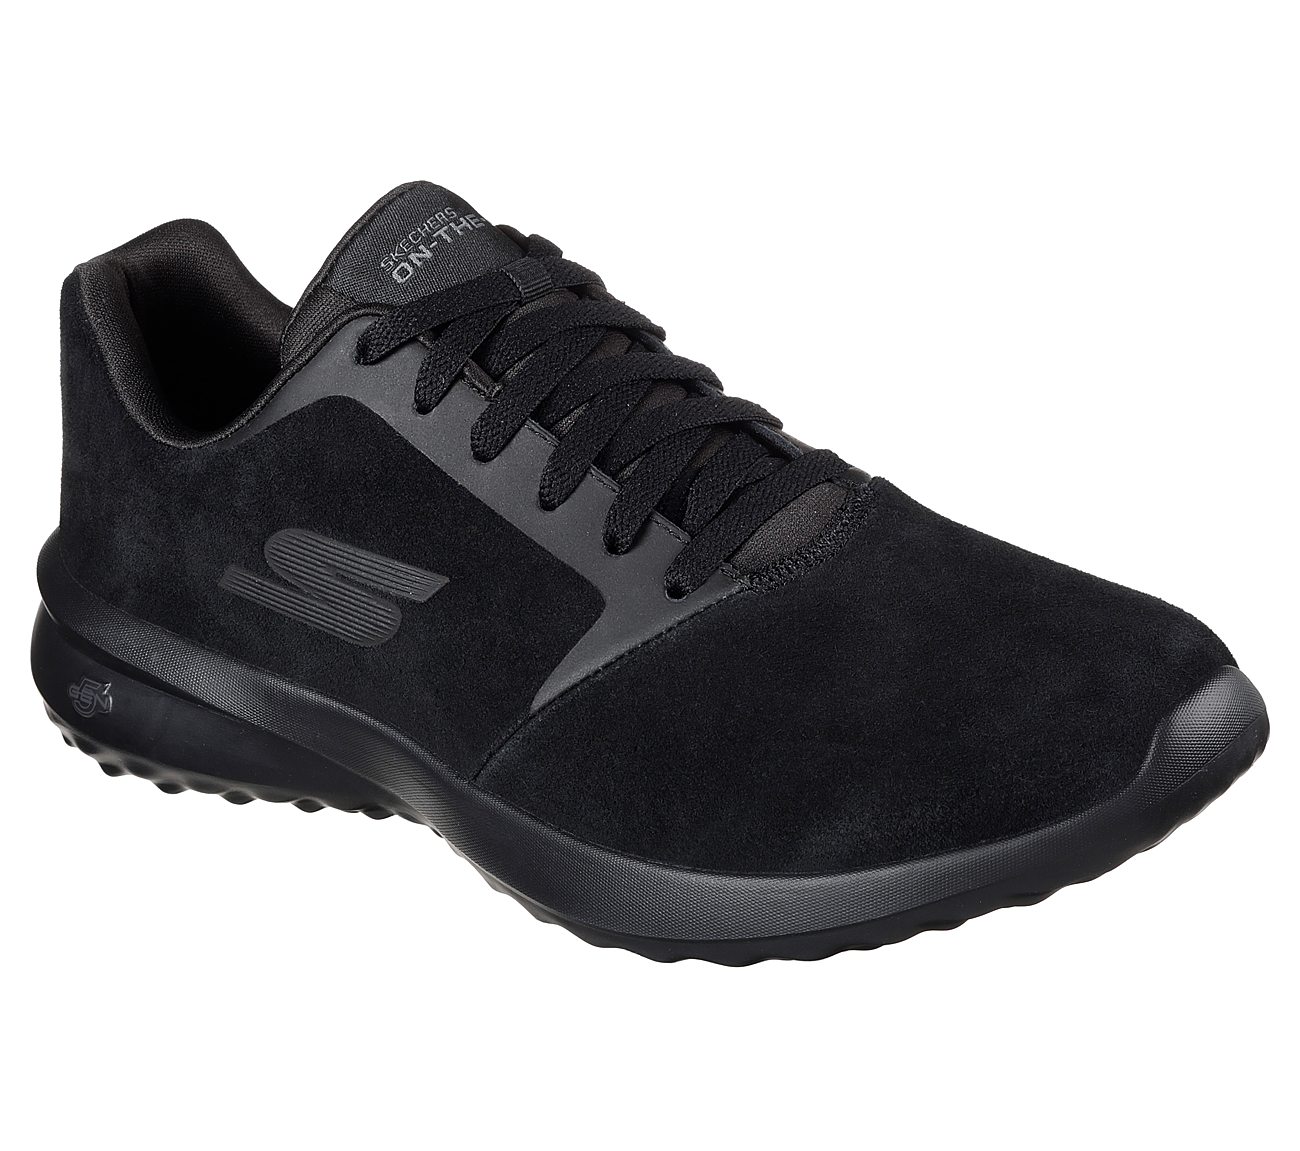 skechers on the go city 3.0 gris